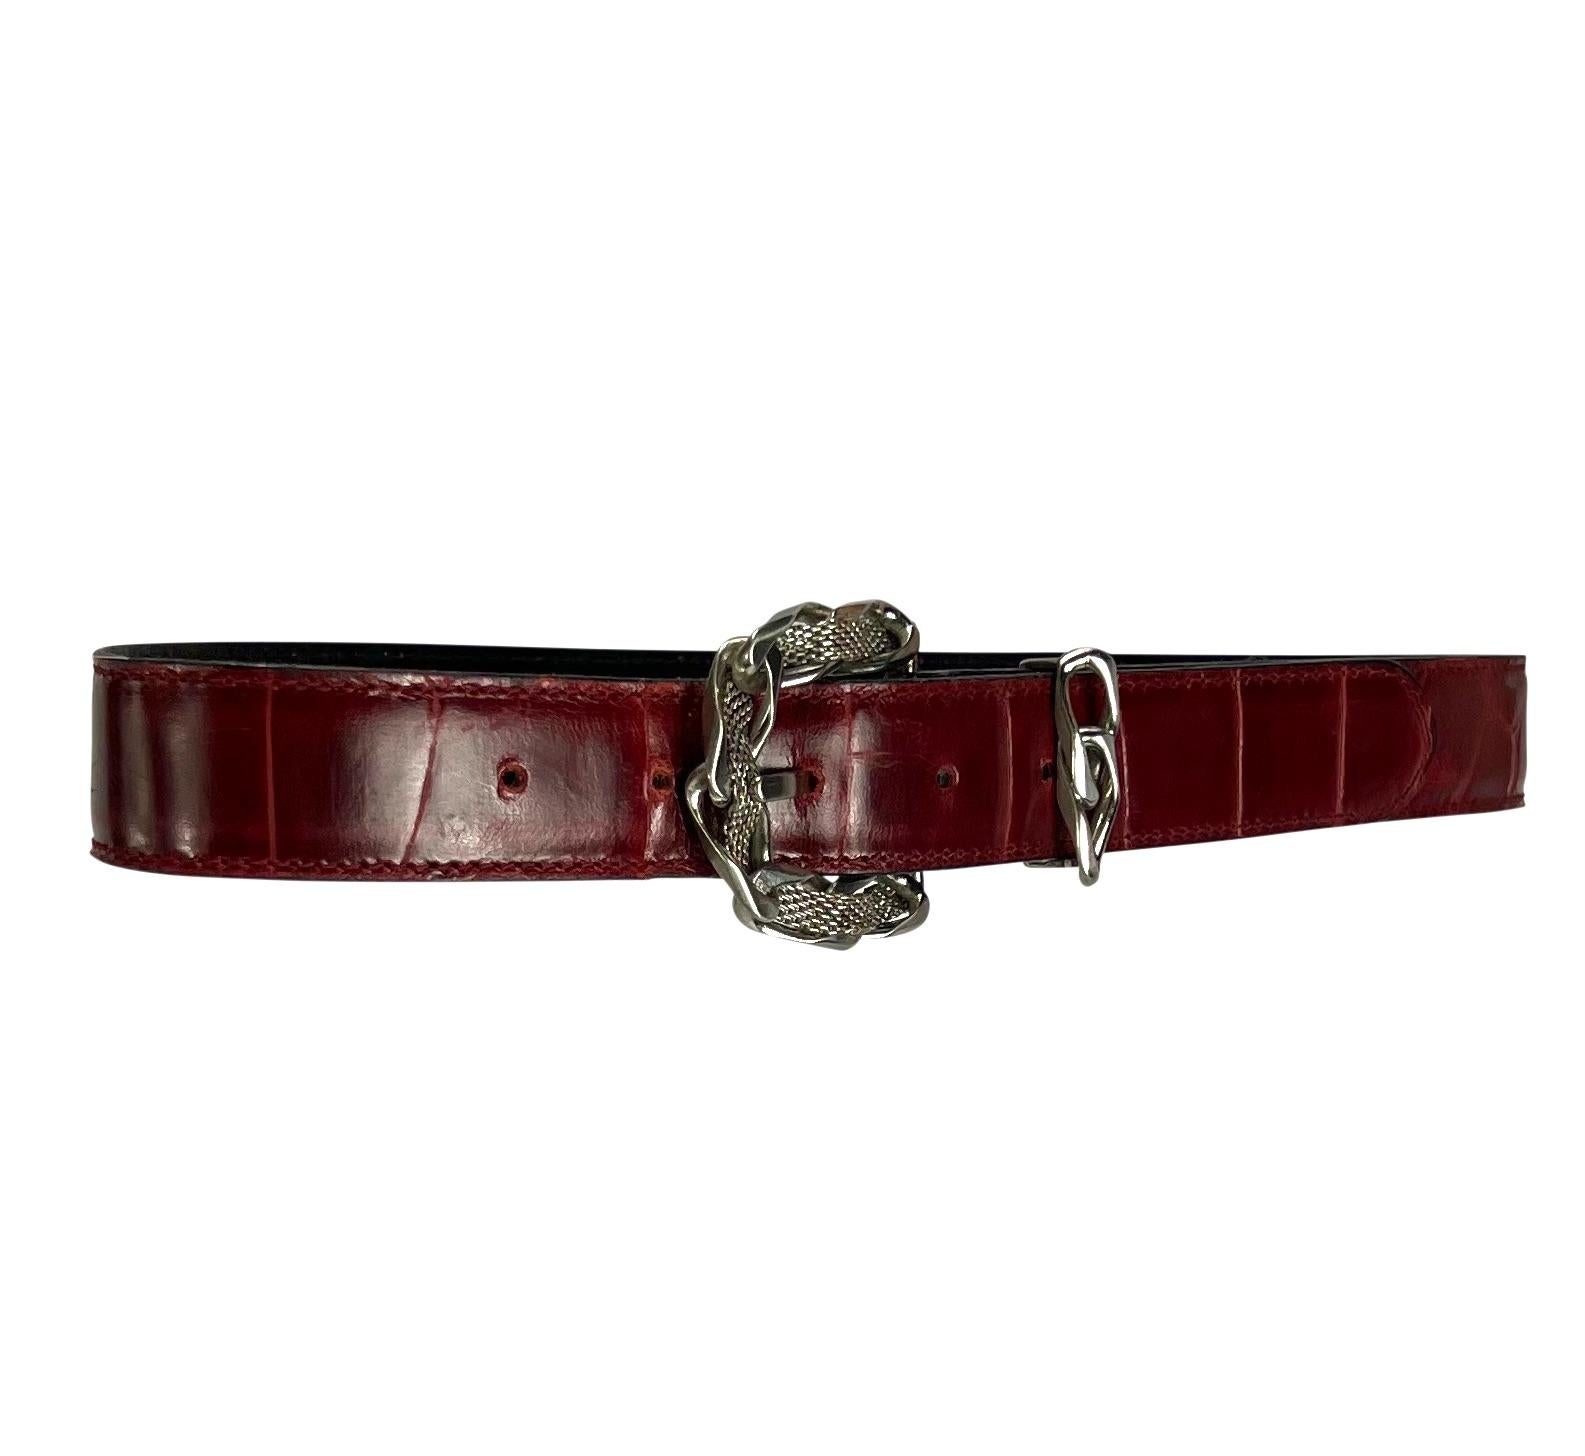 Presenting a fabulous red crocodile Gianni Versace belt, designed by Gianni Versace. From the 1980s, this belt is made complete with a chain belt buckle with metal mesh woven between the links. 

Approximate Measurements: 
Length: 33.25